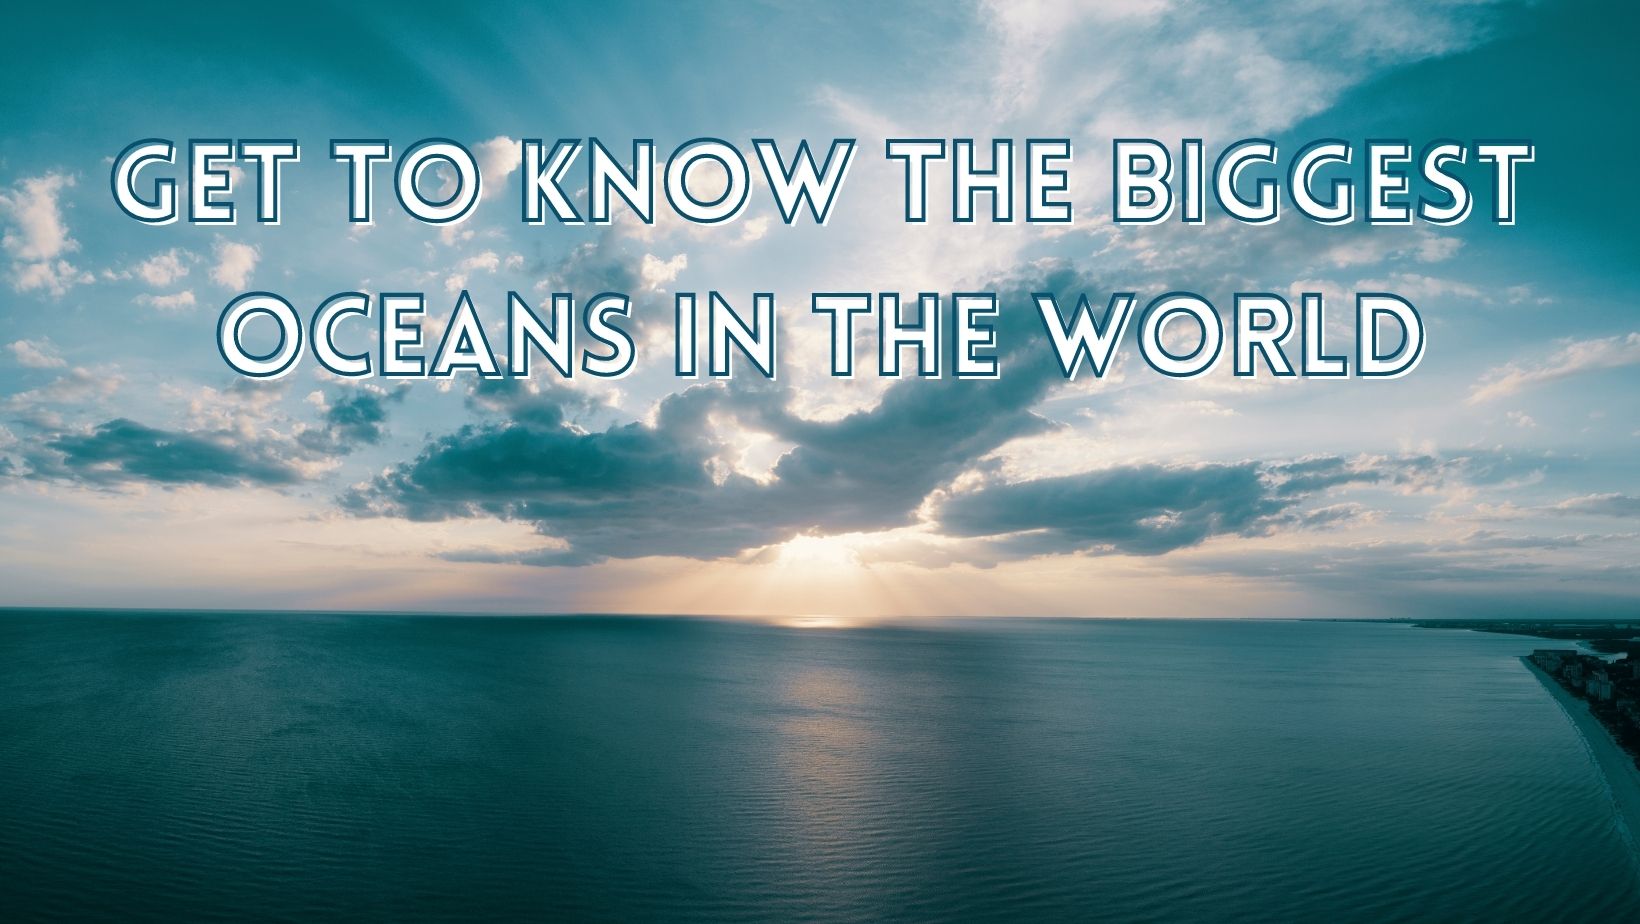 Get To Know The Biggest Oceans in the World